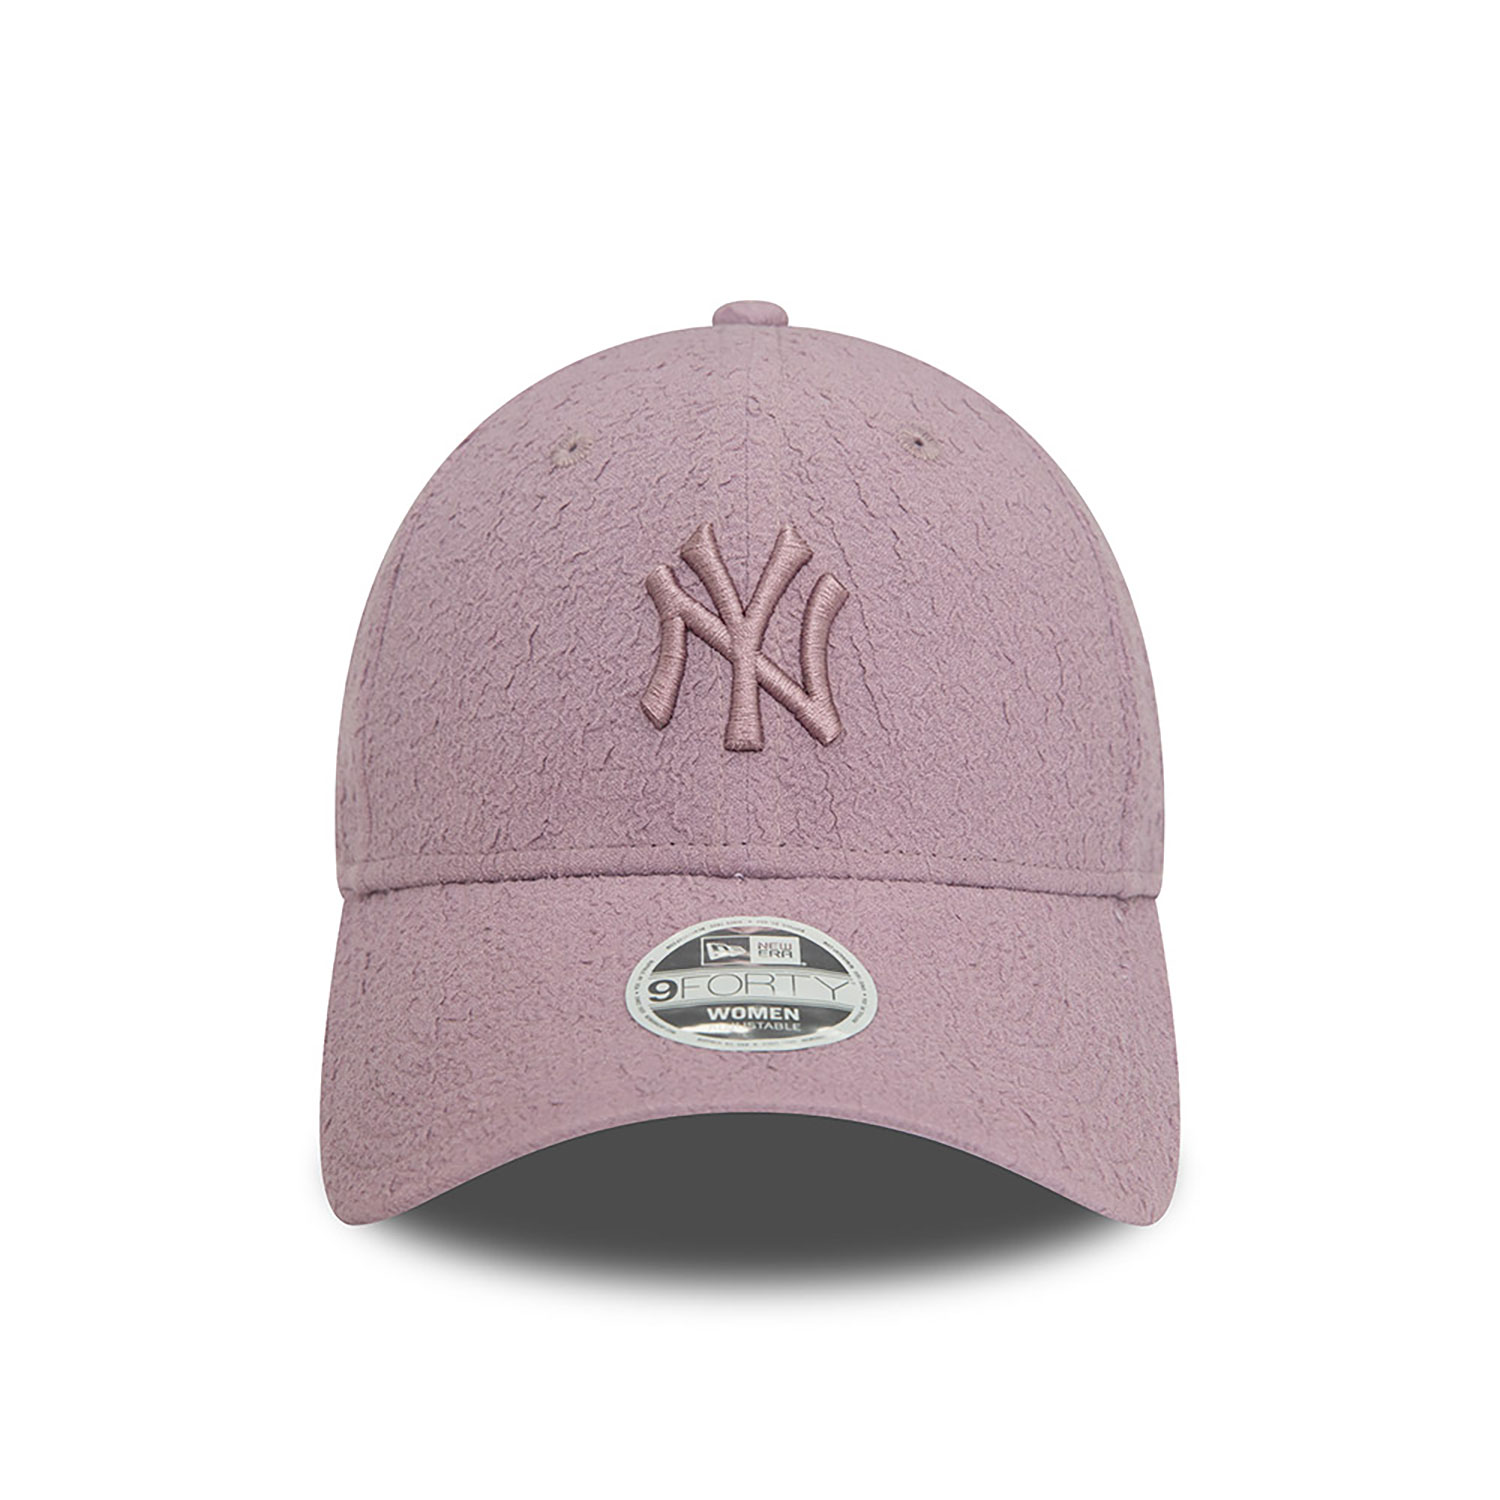 New York Yankees Womens Bubble Stitch Purple 9FORTY Adjustable Cap